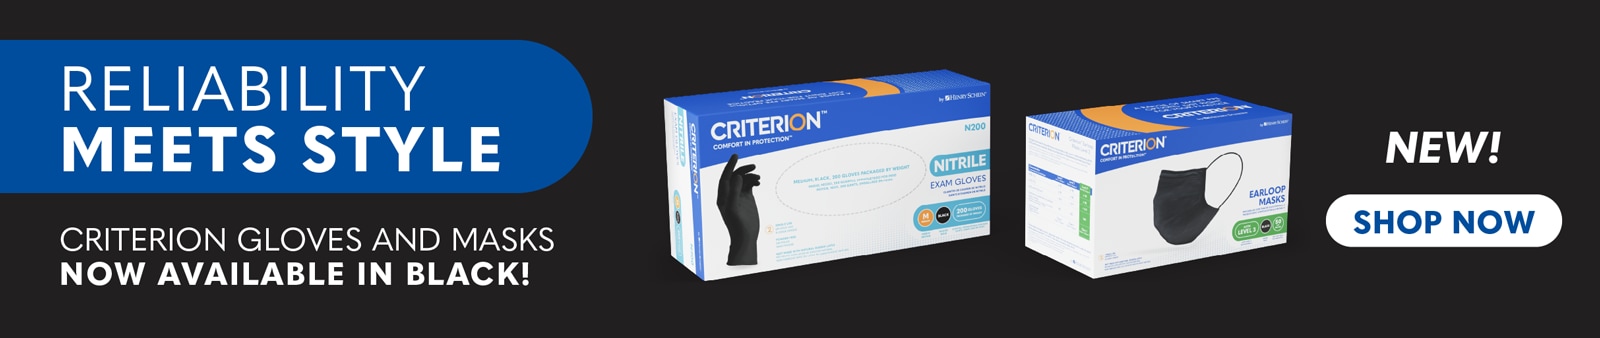 Reliability Meets Style. Criterion Gloves and Masks Now Available in Black!